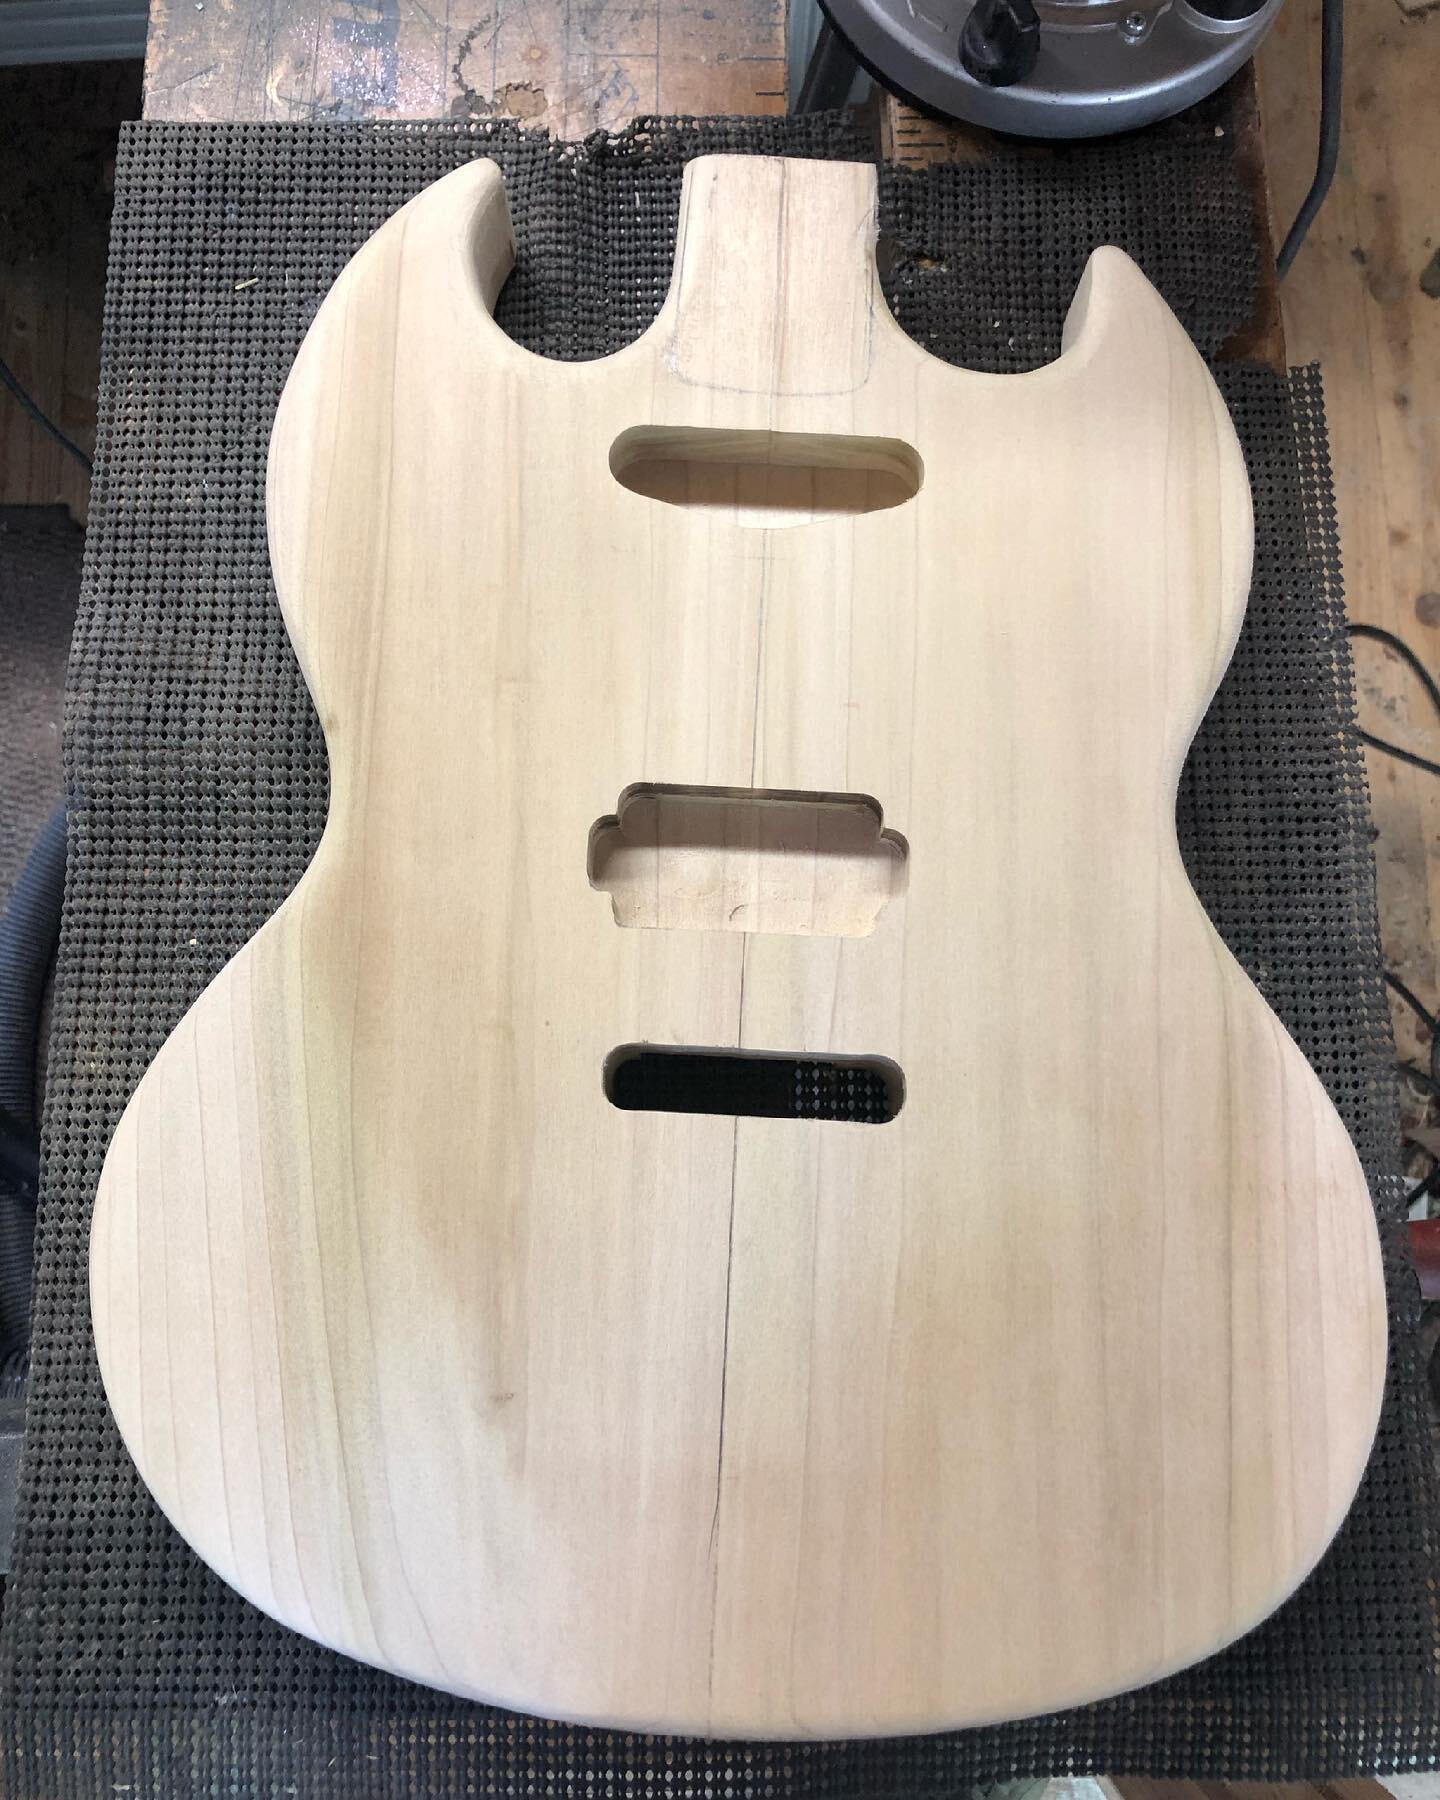 So pickup and tremolo cavities are now in the current build 👍
&middot;
🙂 For more info on my guitars go to www.mayburyguitars.com #stratocaster #guitar #luthiery #boutiqueguitars #strat #guitarbody #handmadeguitar #sgguitar #luthier #customguitars 